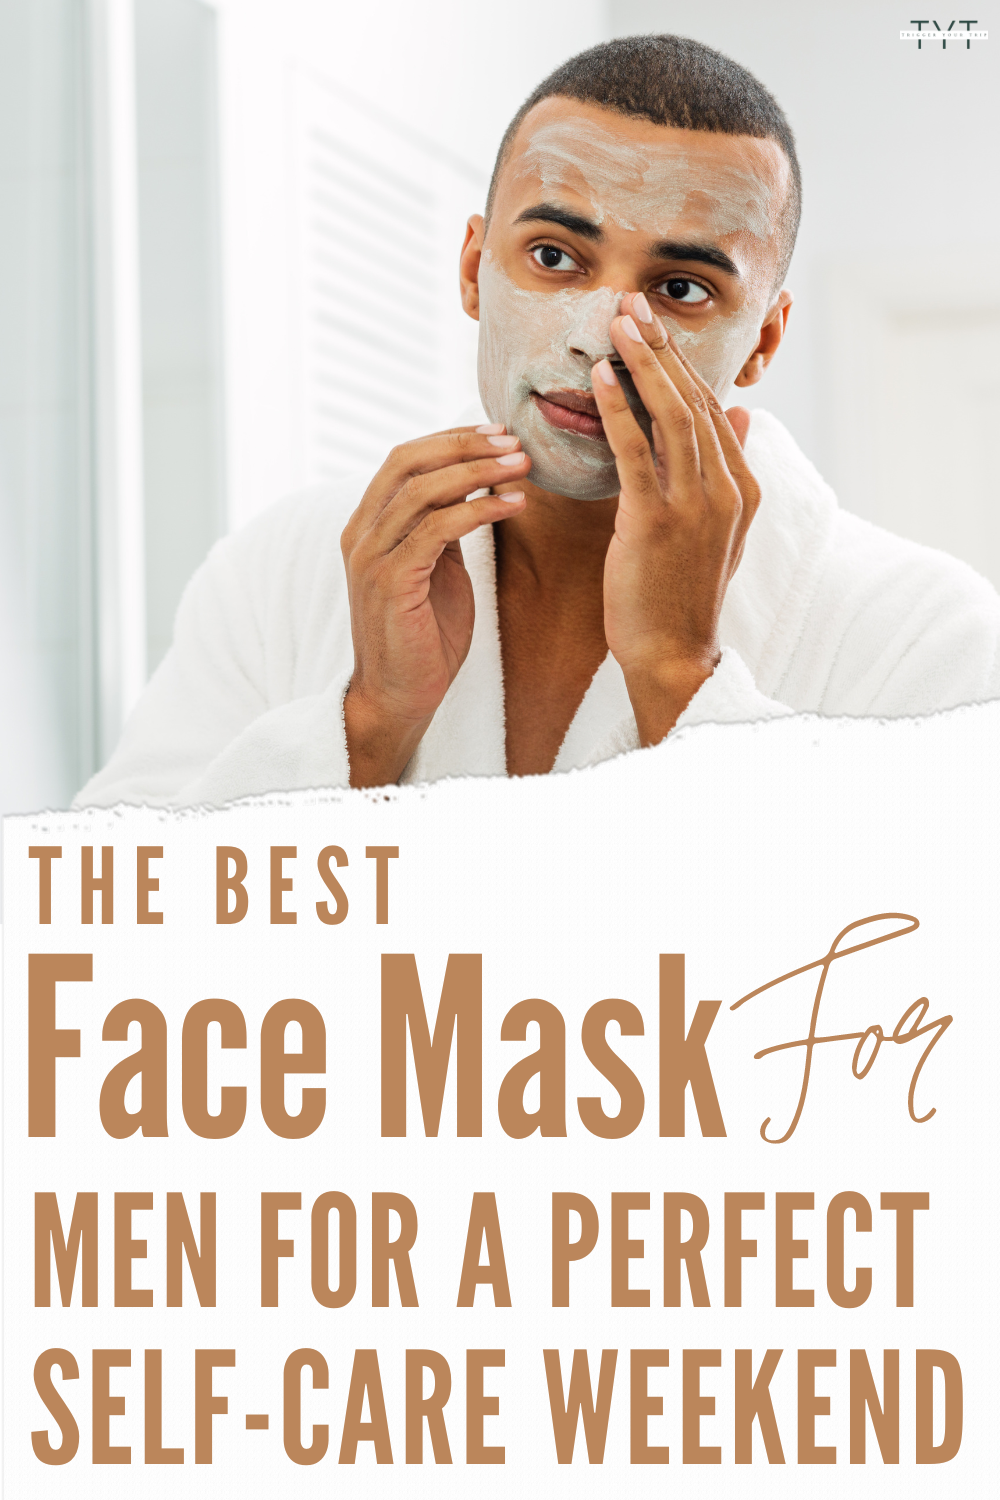 hydrating mask for men to kill dead skin cells